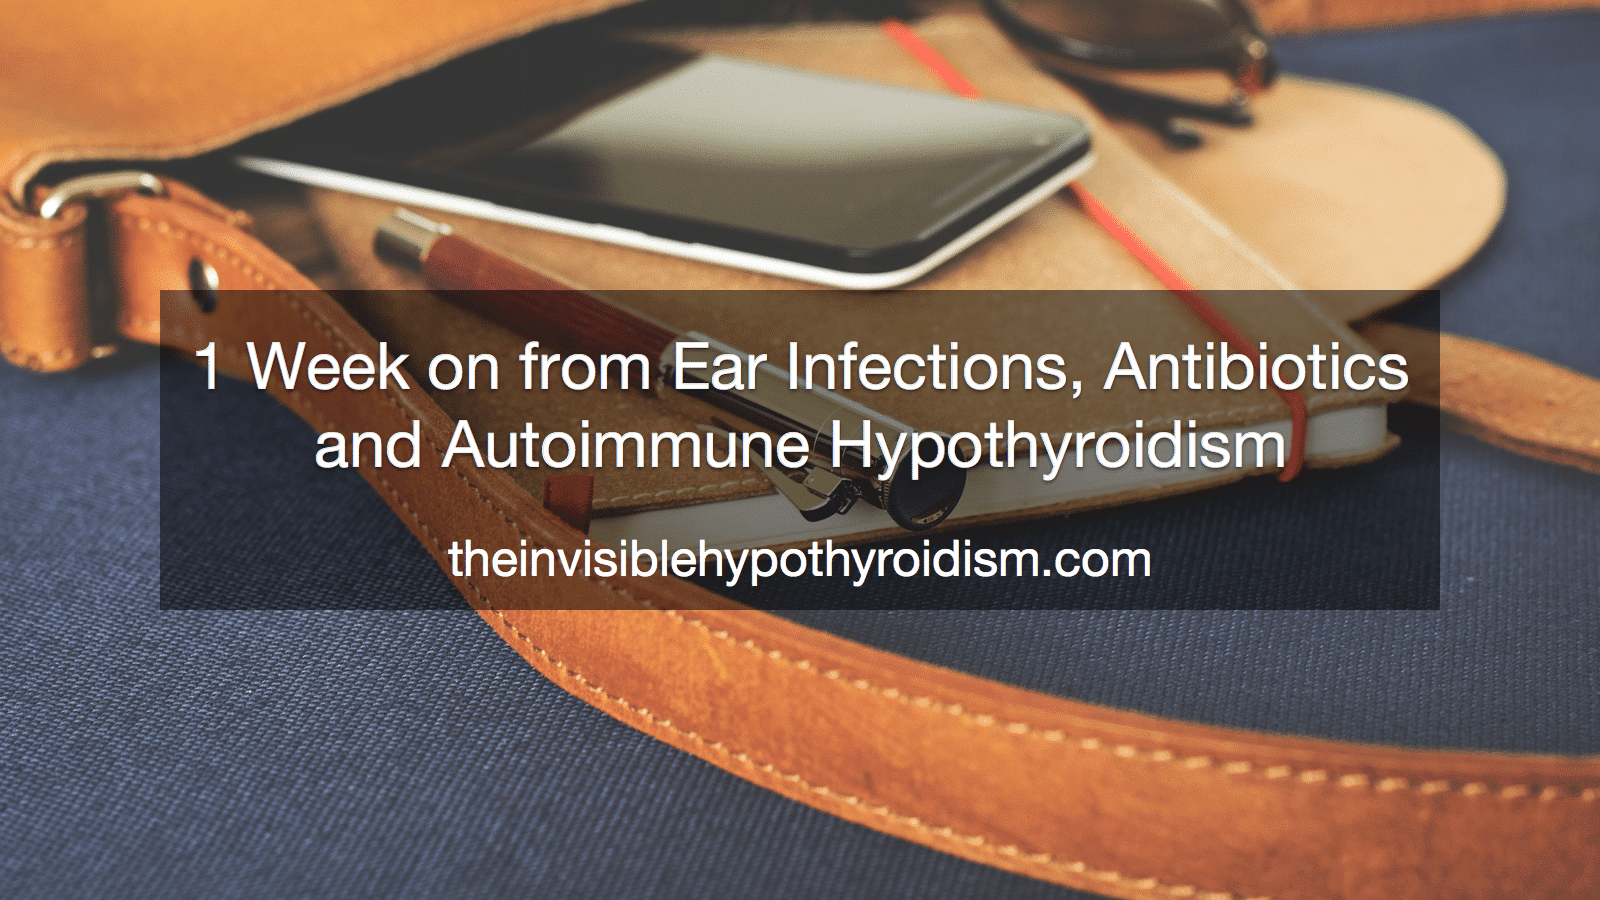 Update: One Week on from 'Ear Infections, Antibiotics and Autoimmune Hypothyroidism'